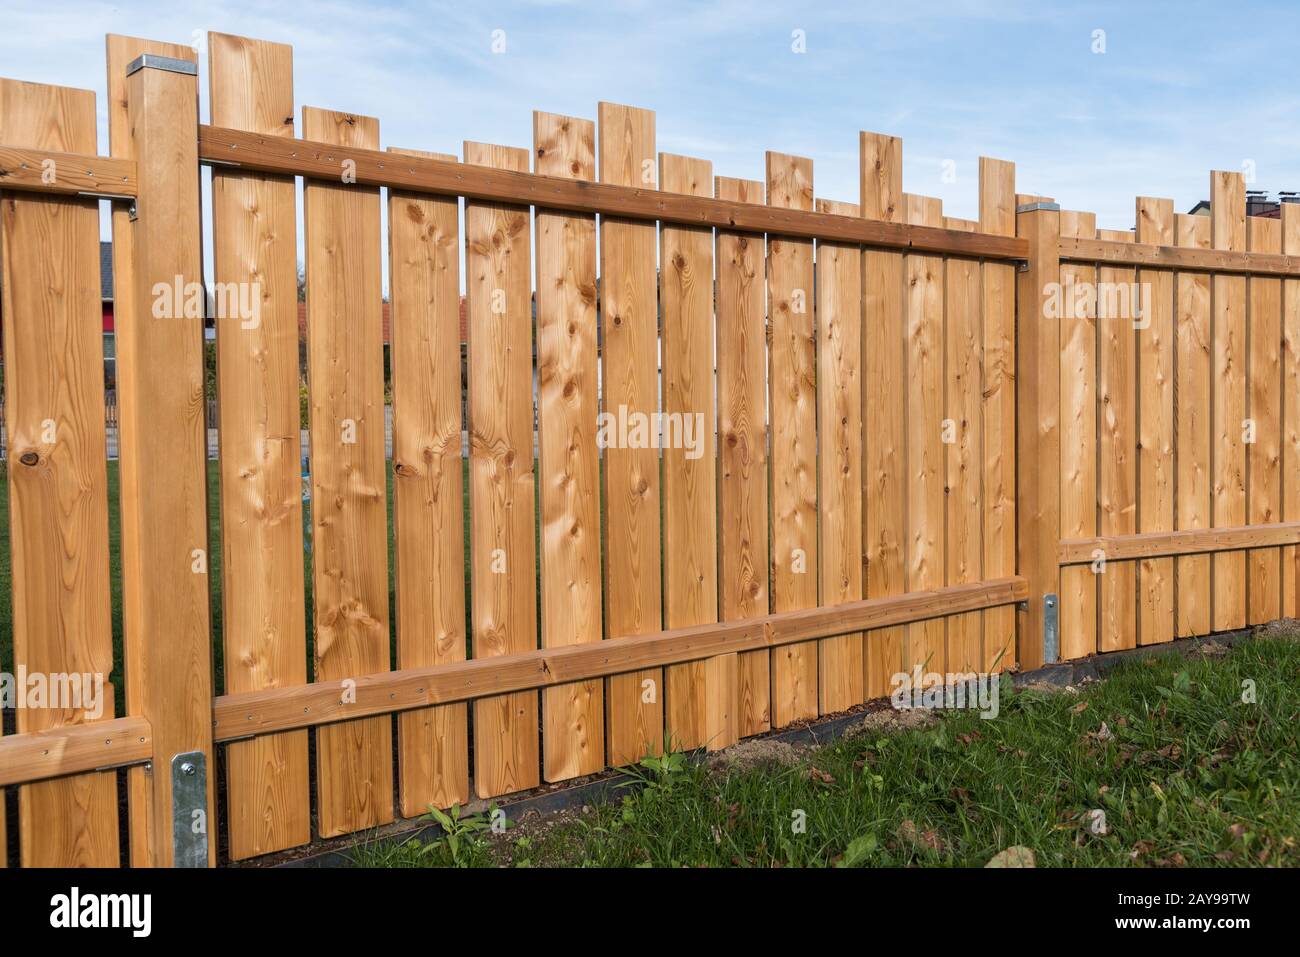 Handmade privacy shield made of wooden boards also serves as noise protection Stock Photo